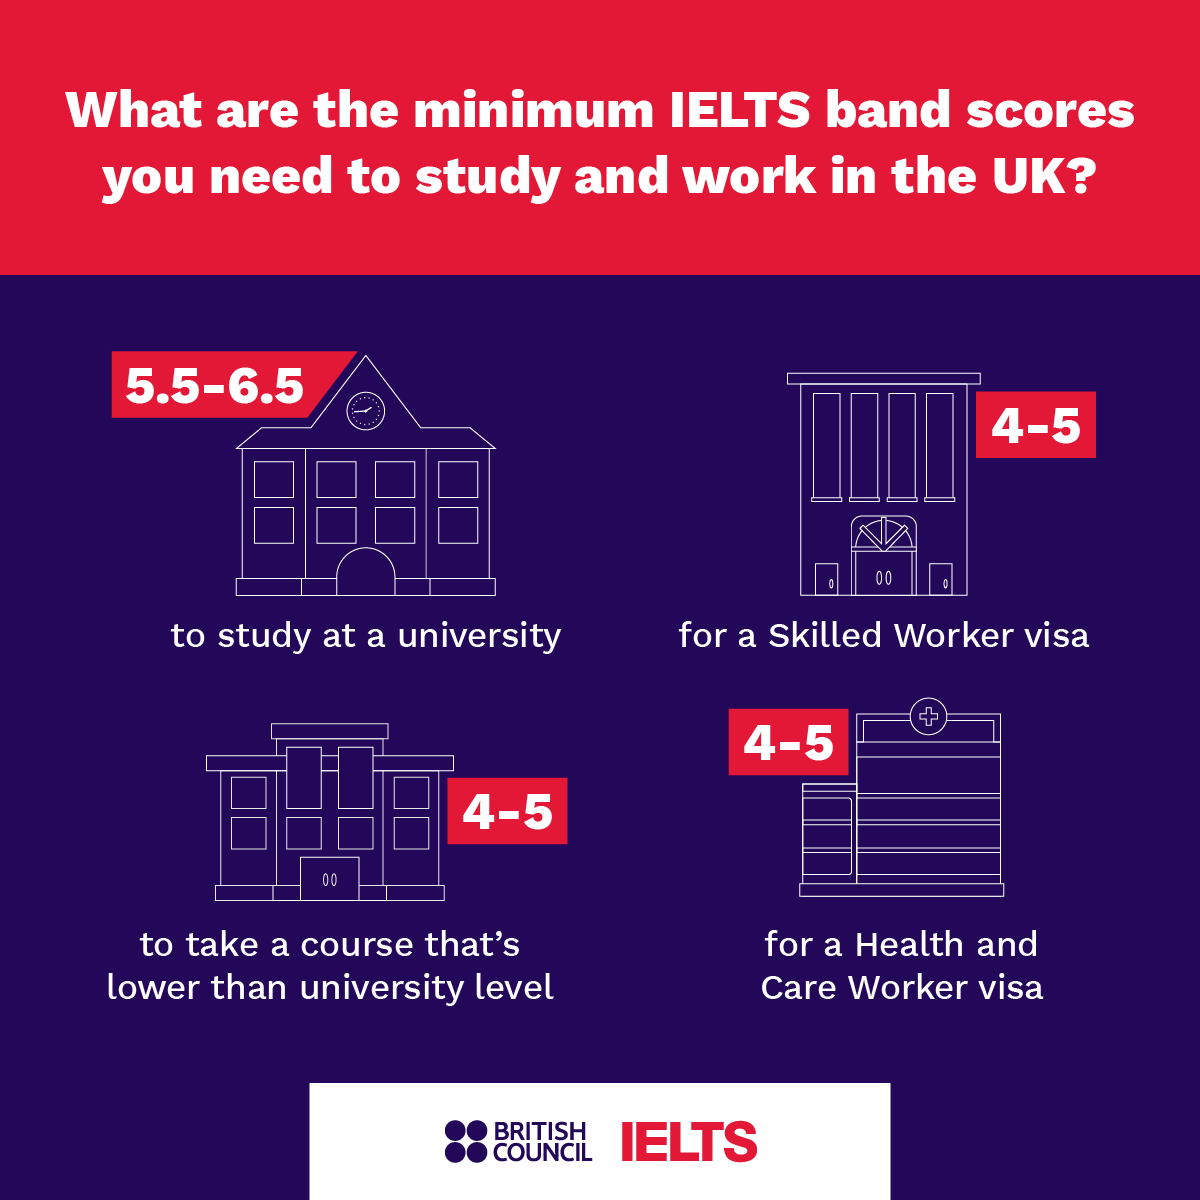 Dreaming about studying or working in the UK? ✈️🇬🇧

Make sure you know exactly what IELTS band score you need for your visa. Would you like to work or study in the UK?

Click for more info: 
bit.ly/3TjPgNG 

#IELTS #UK #StudyUK #TravelUK #UKVisa #TakeIELTS #IELTSTest